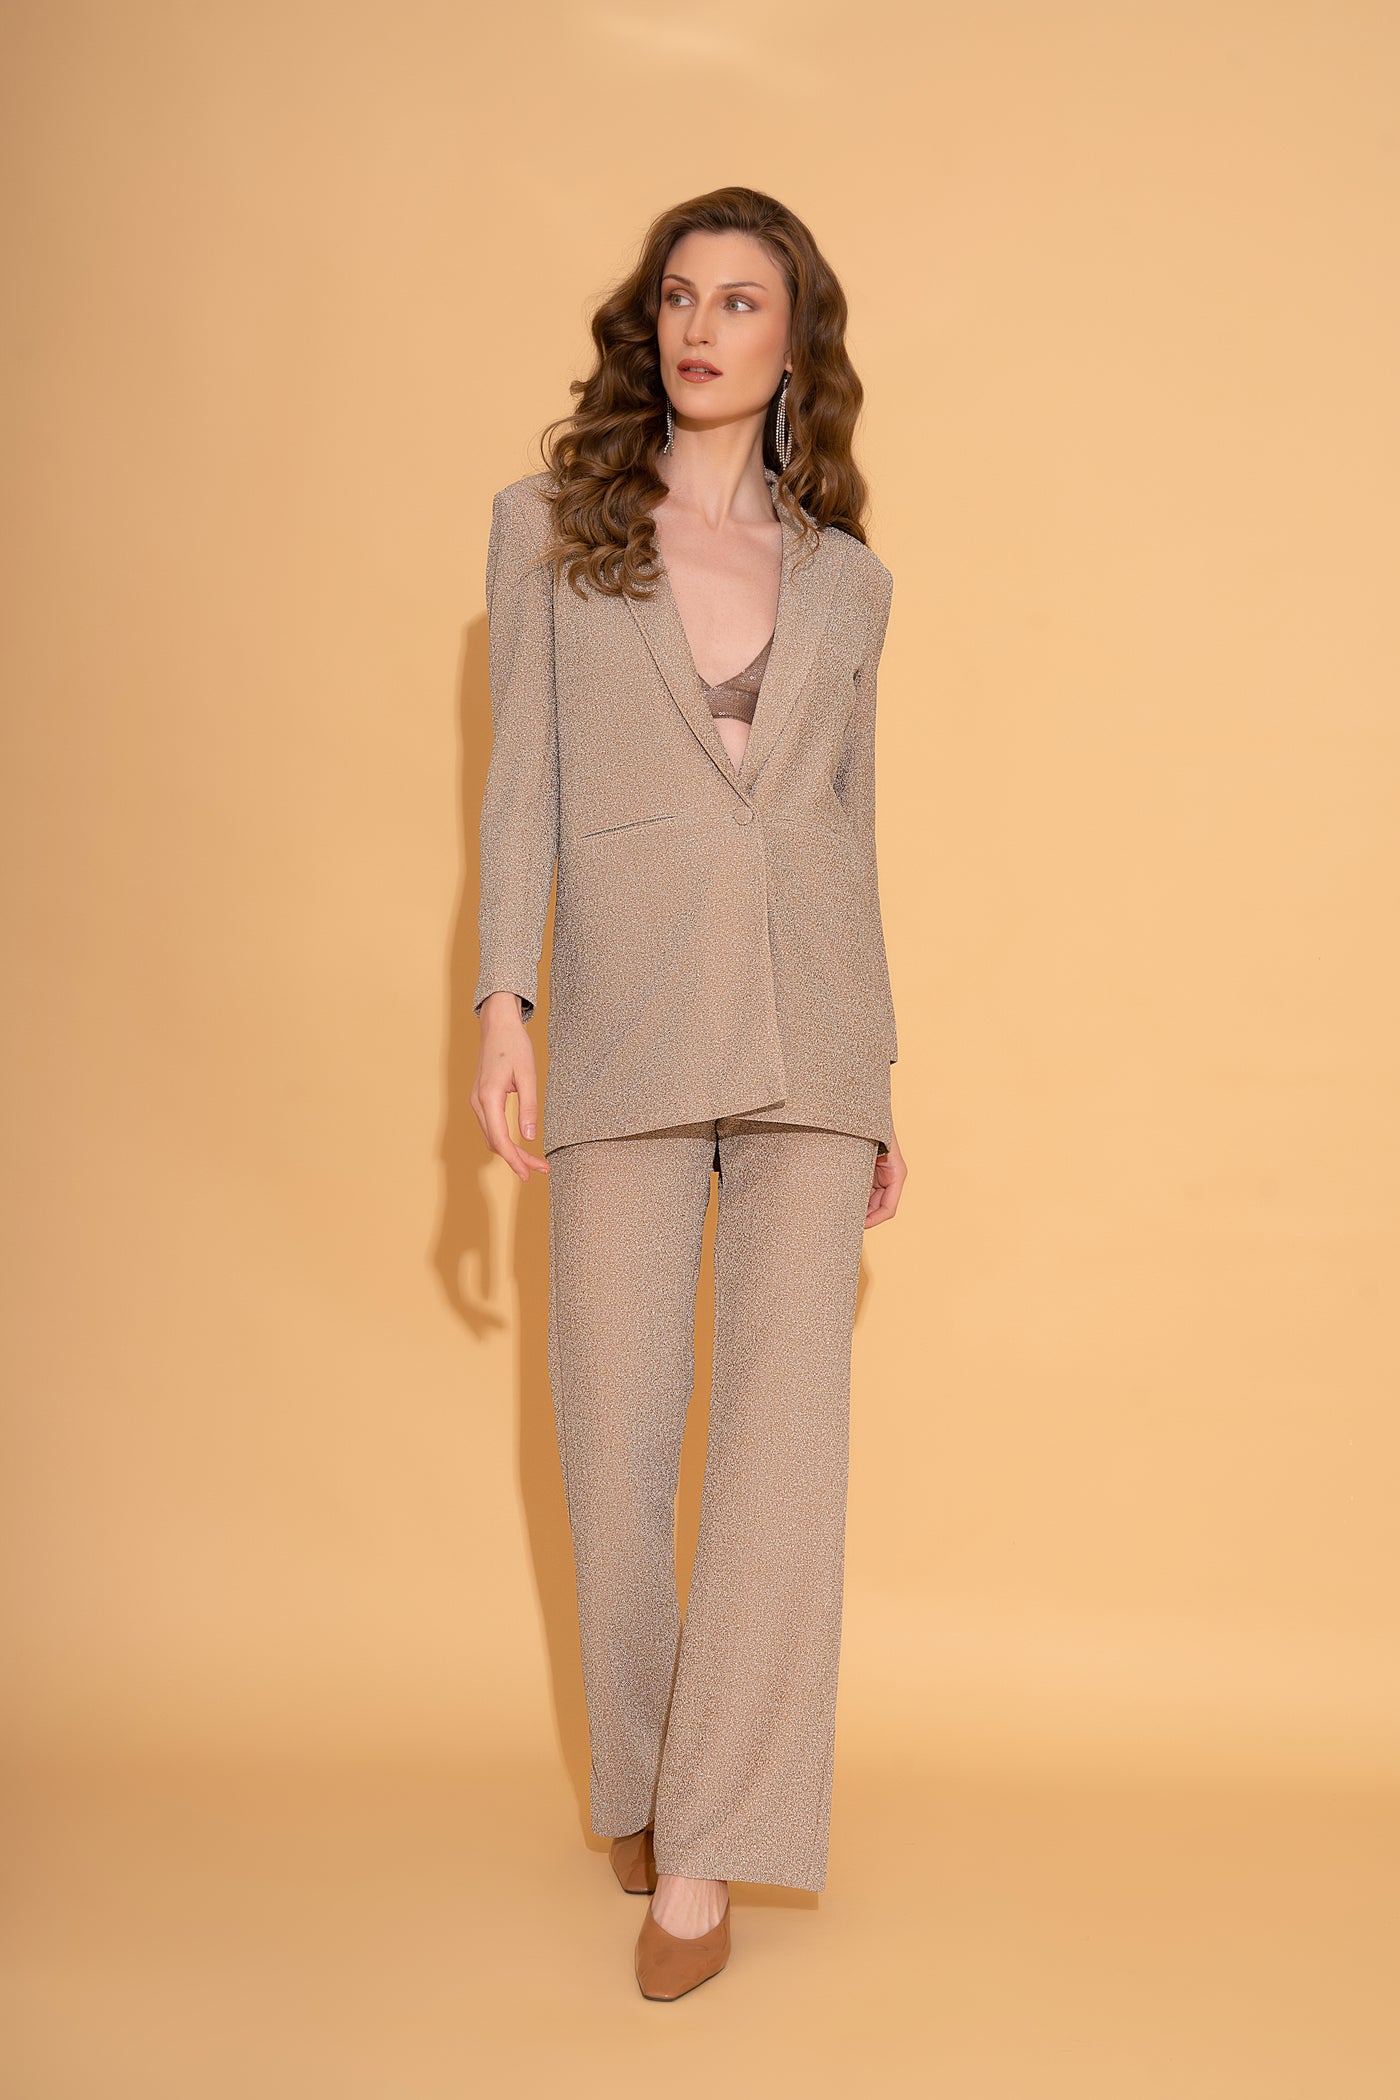 Champagne Shimmer Blazer and Pants Co-ord